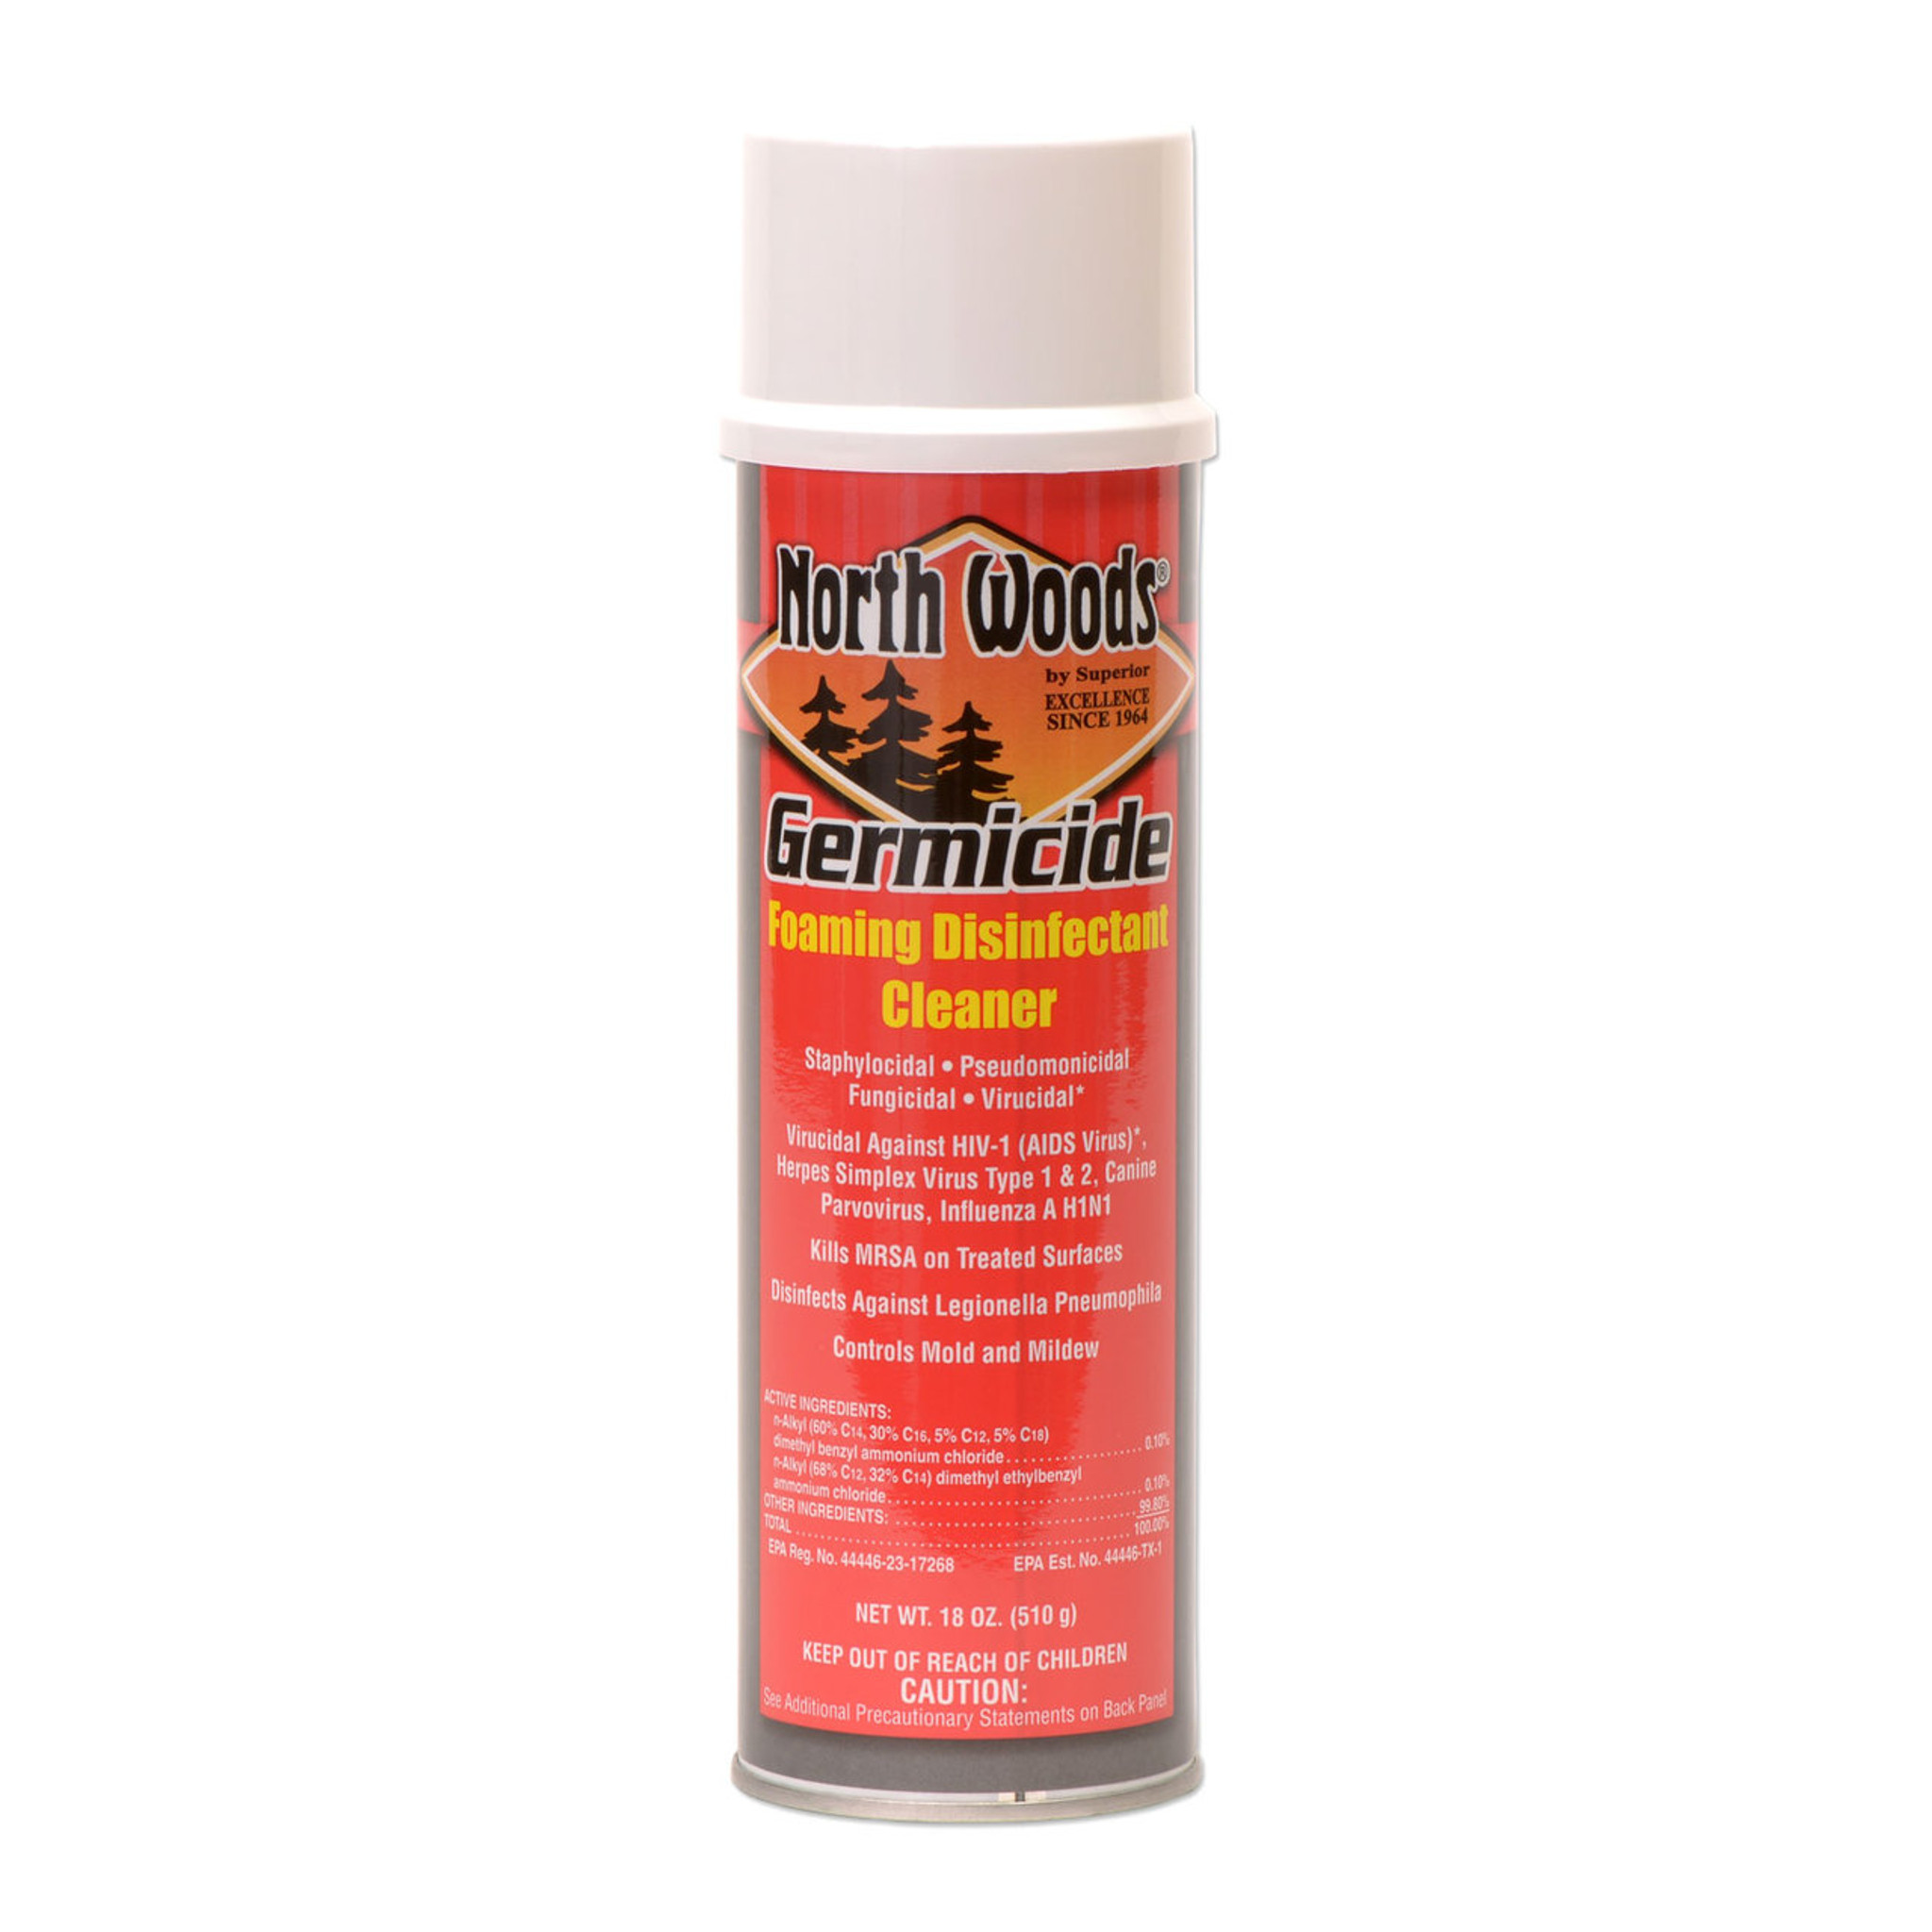 Dymon, ITW08020CT, Do-It-All Foaming Germicidal Cleaner, 12 / Carton, White